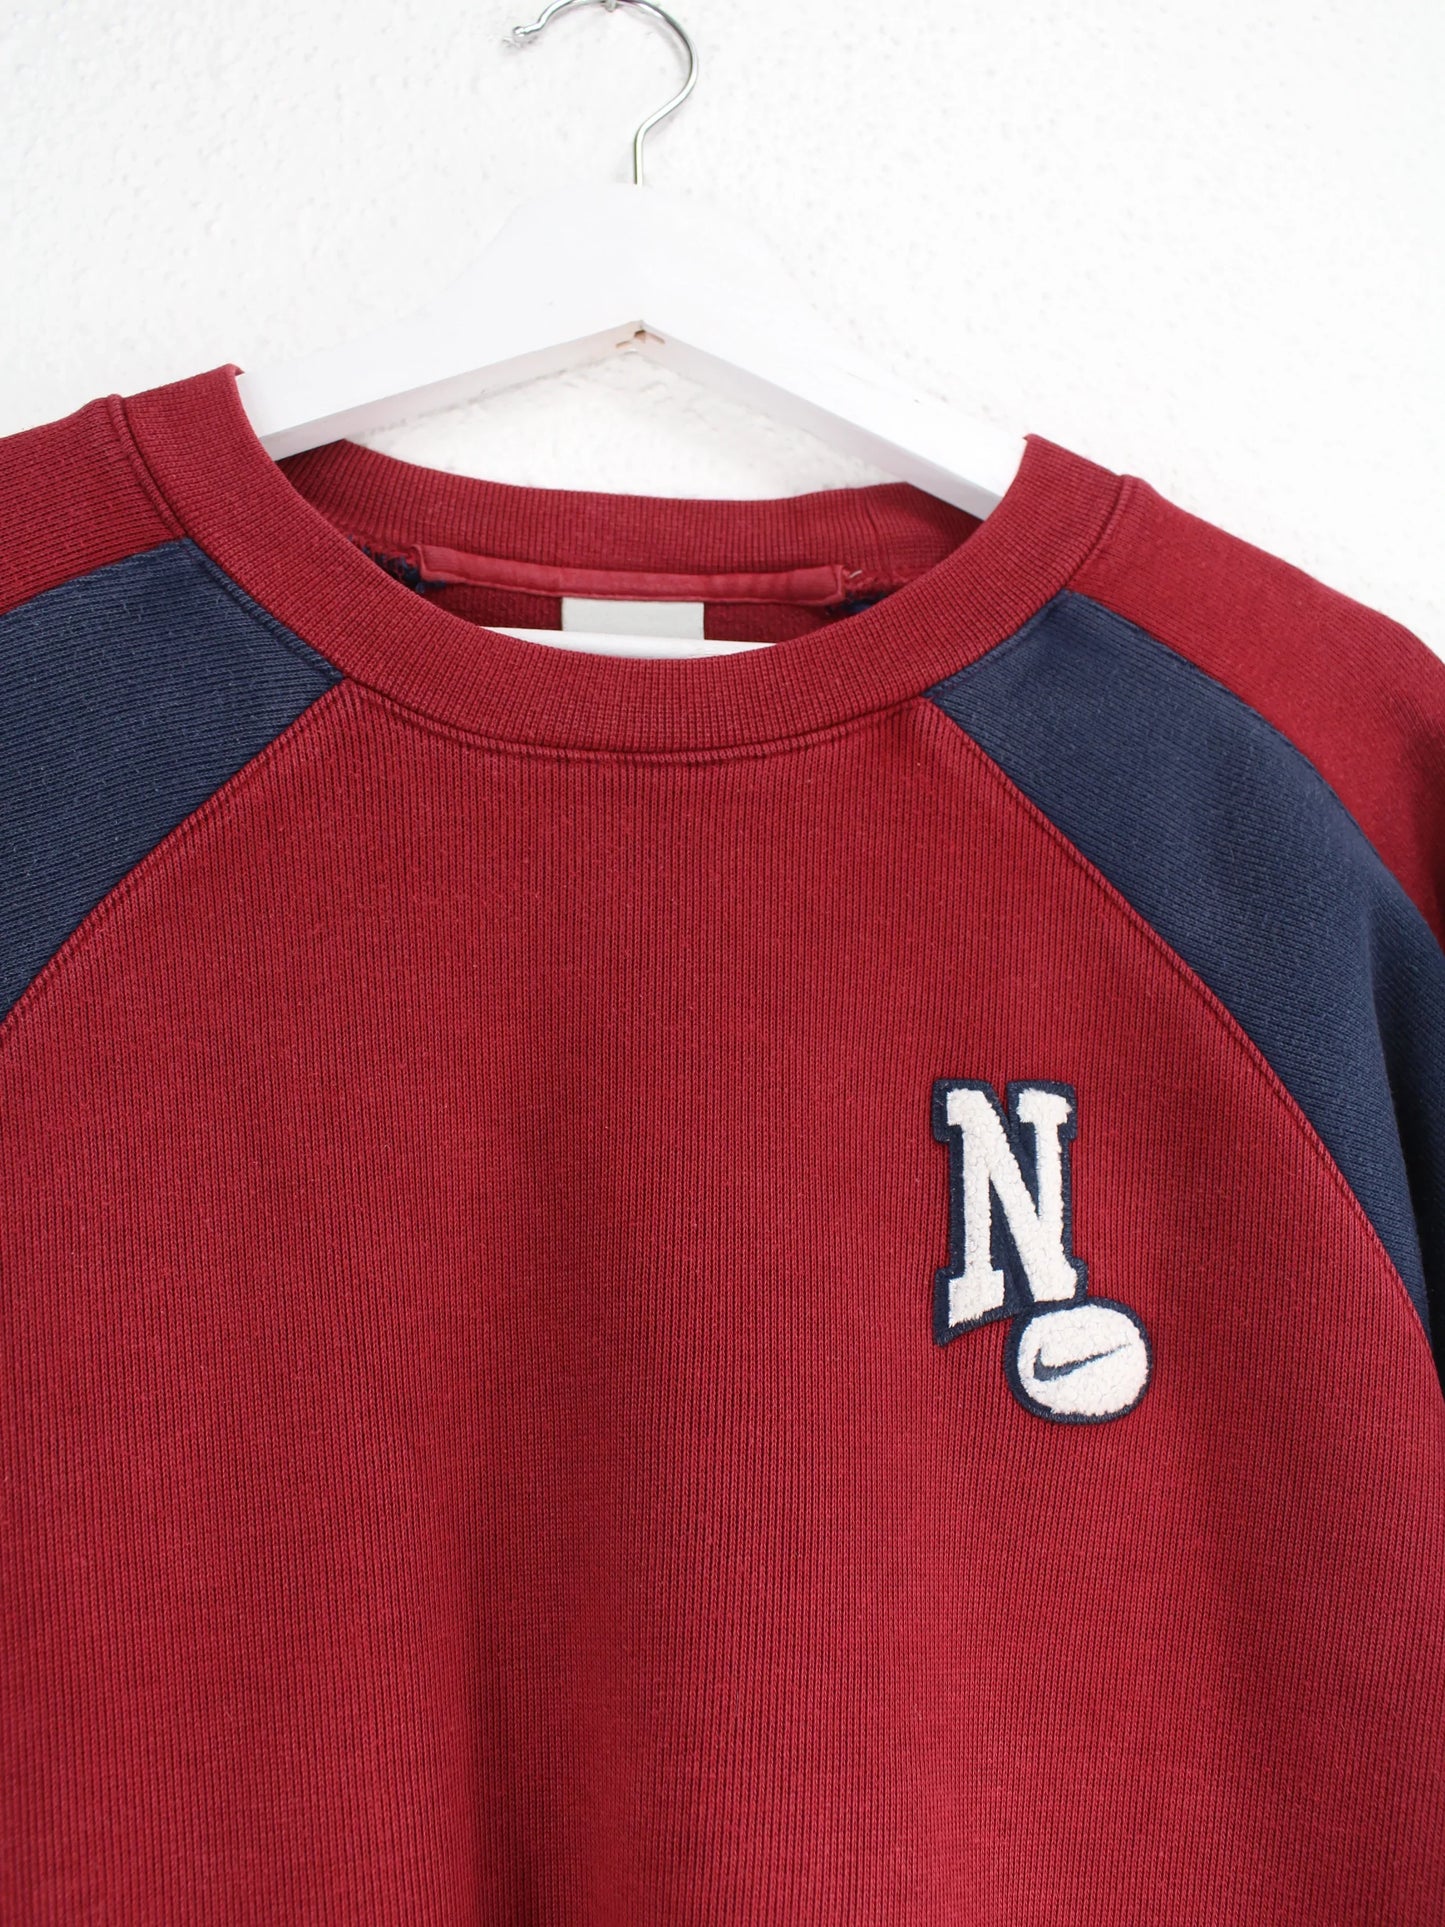 Nike Embroidered Sweater Rot XS